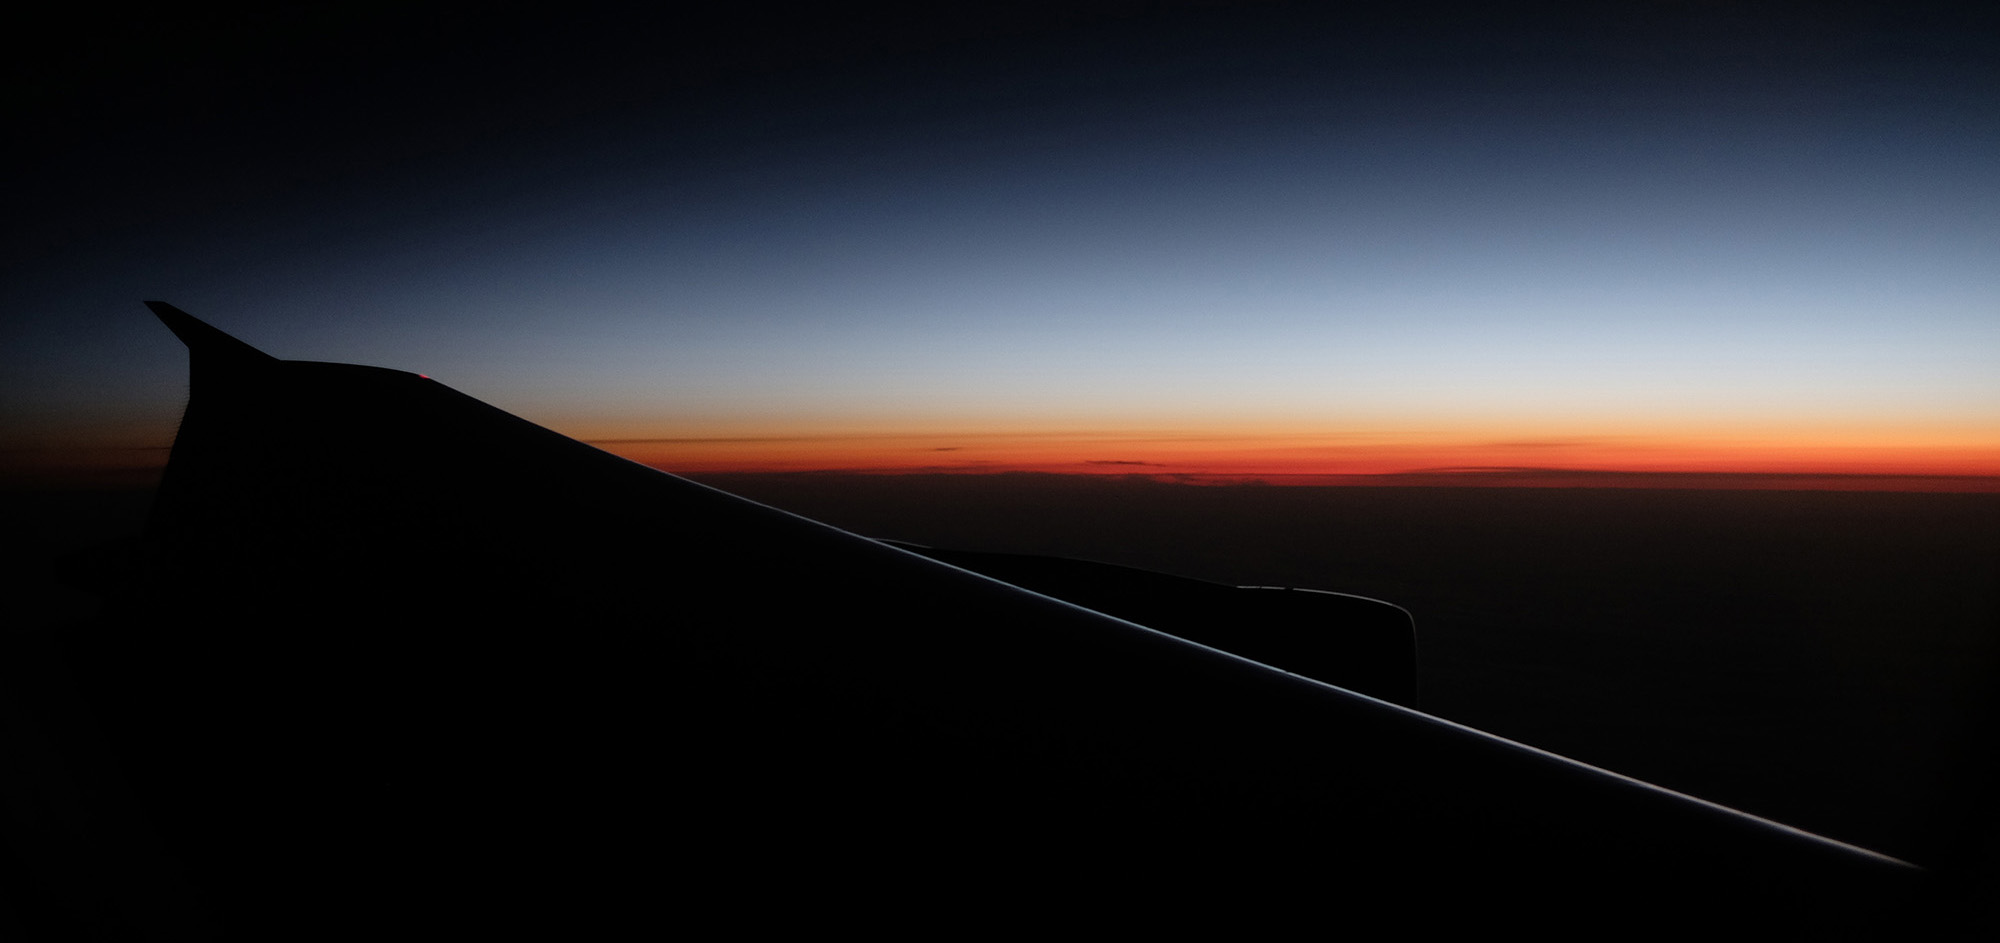 The sun sets behind the wing of an airliner.